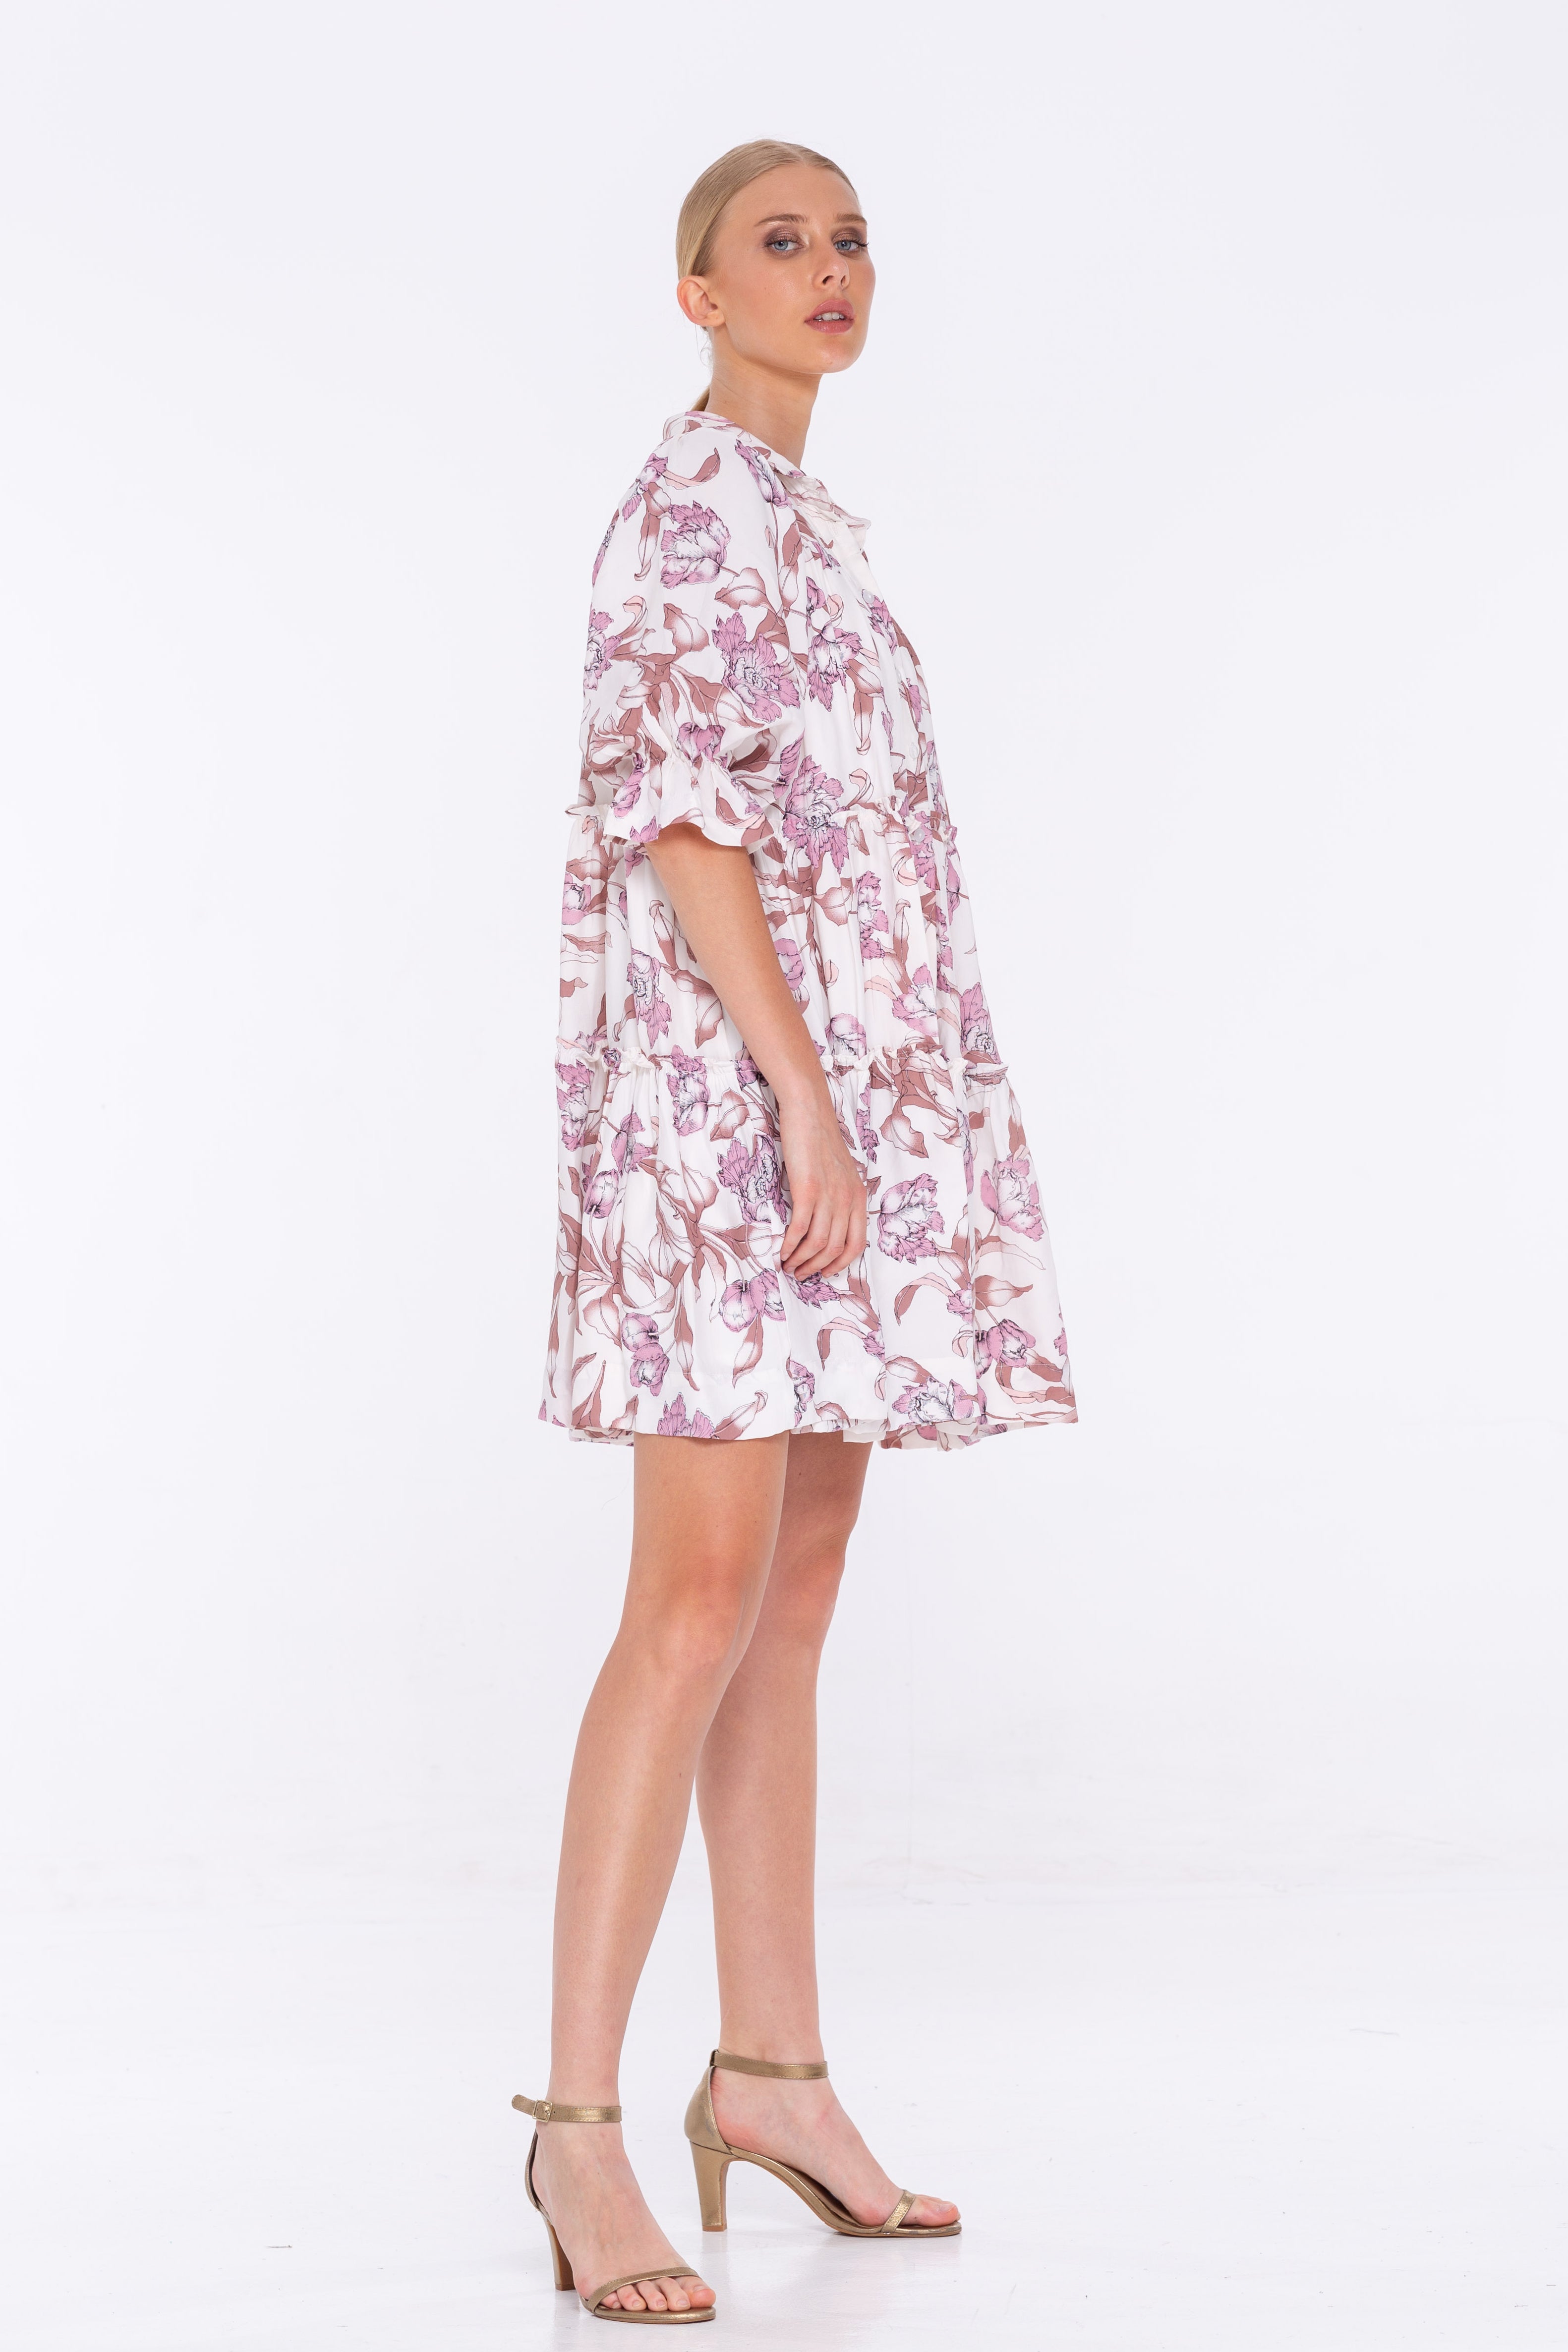 You Put A Spell On Me Dress - White/Mauve/Pink Floral